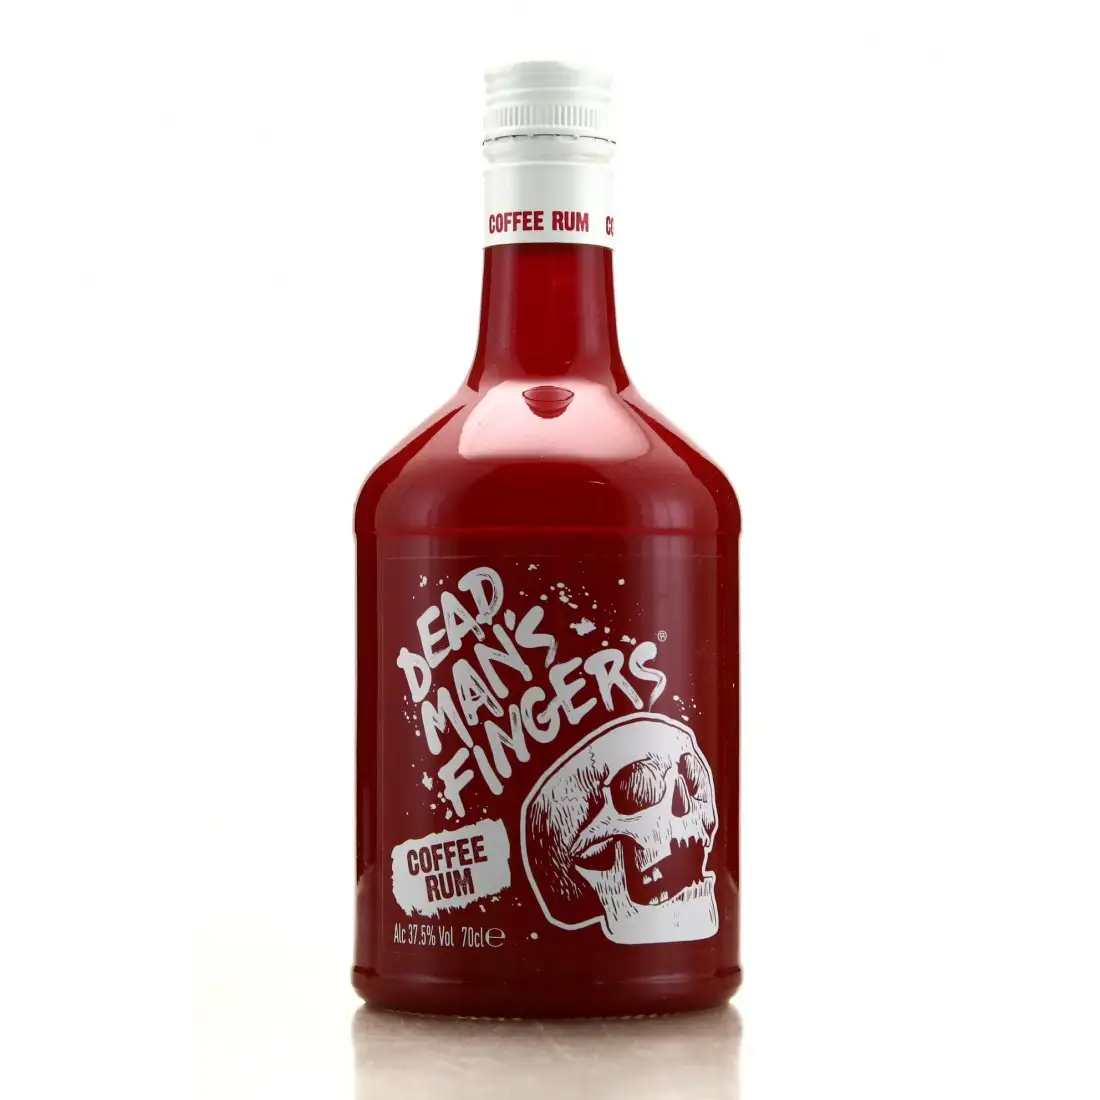 Image of the front of the bottle of the rum Dead Man’s Fingers Coffee Rum